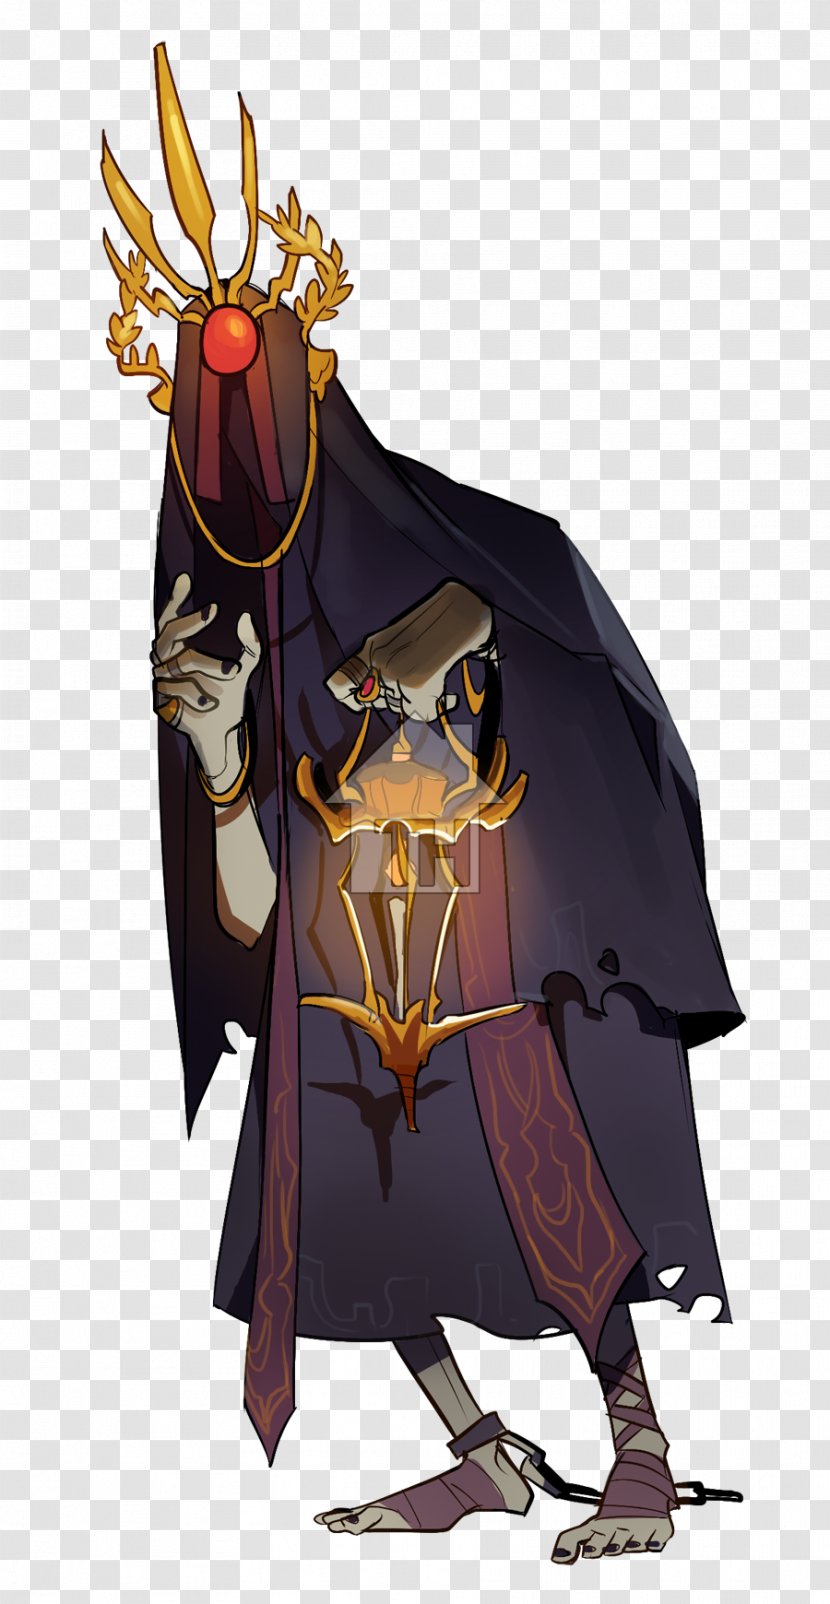 Outerwear - Cartoon - Clergy Mantle Transparent PNG